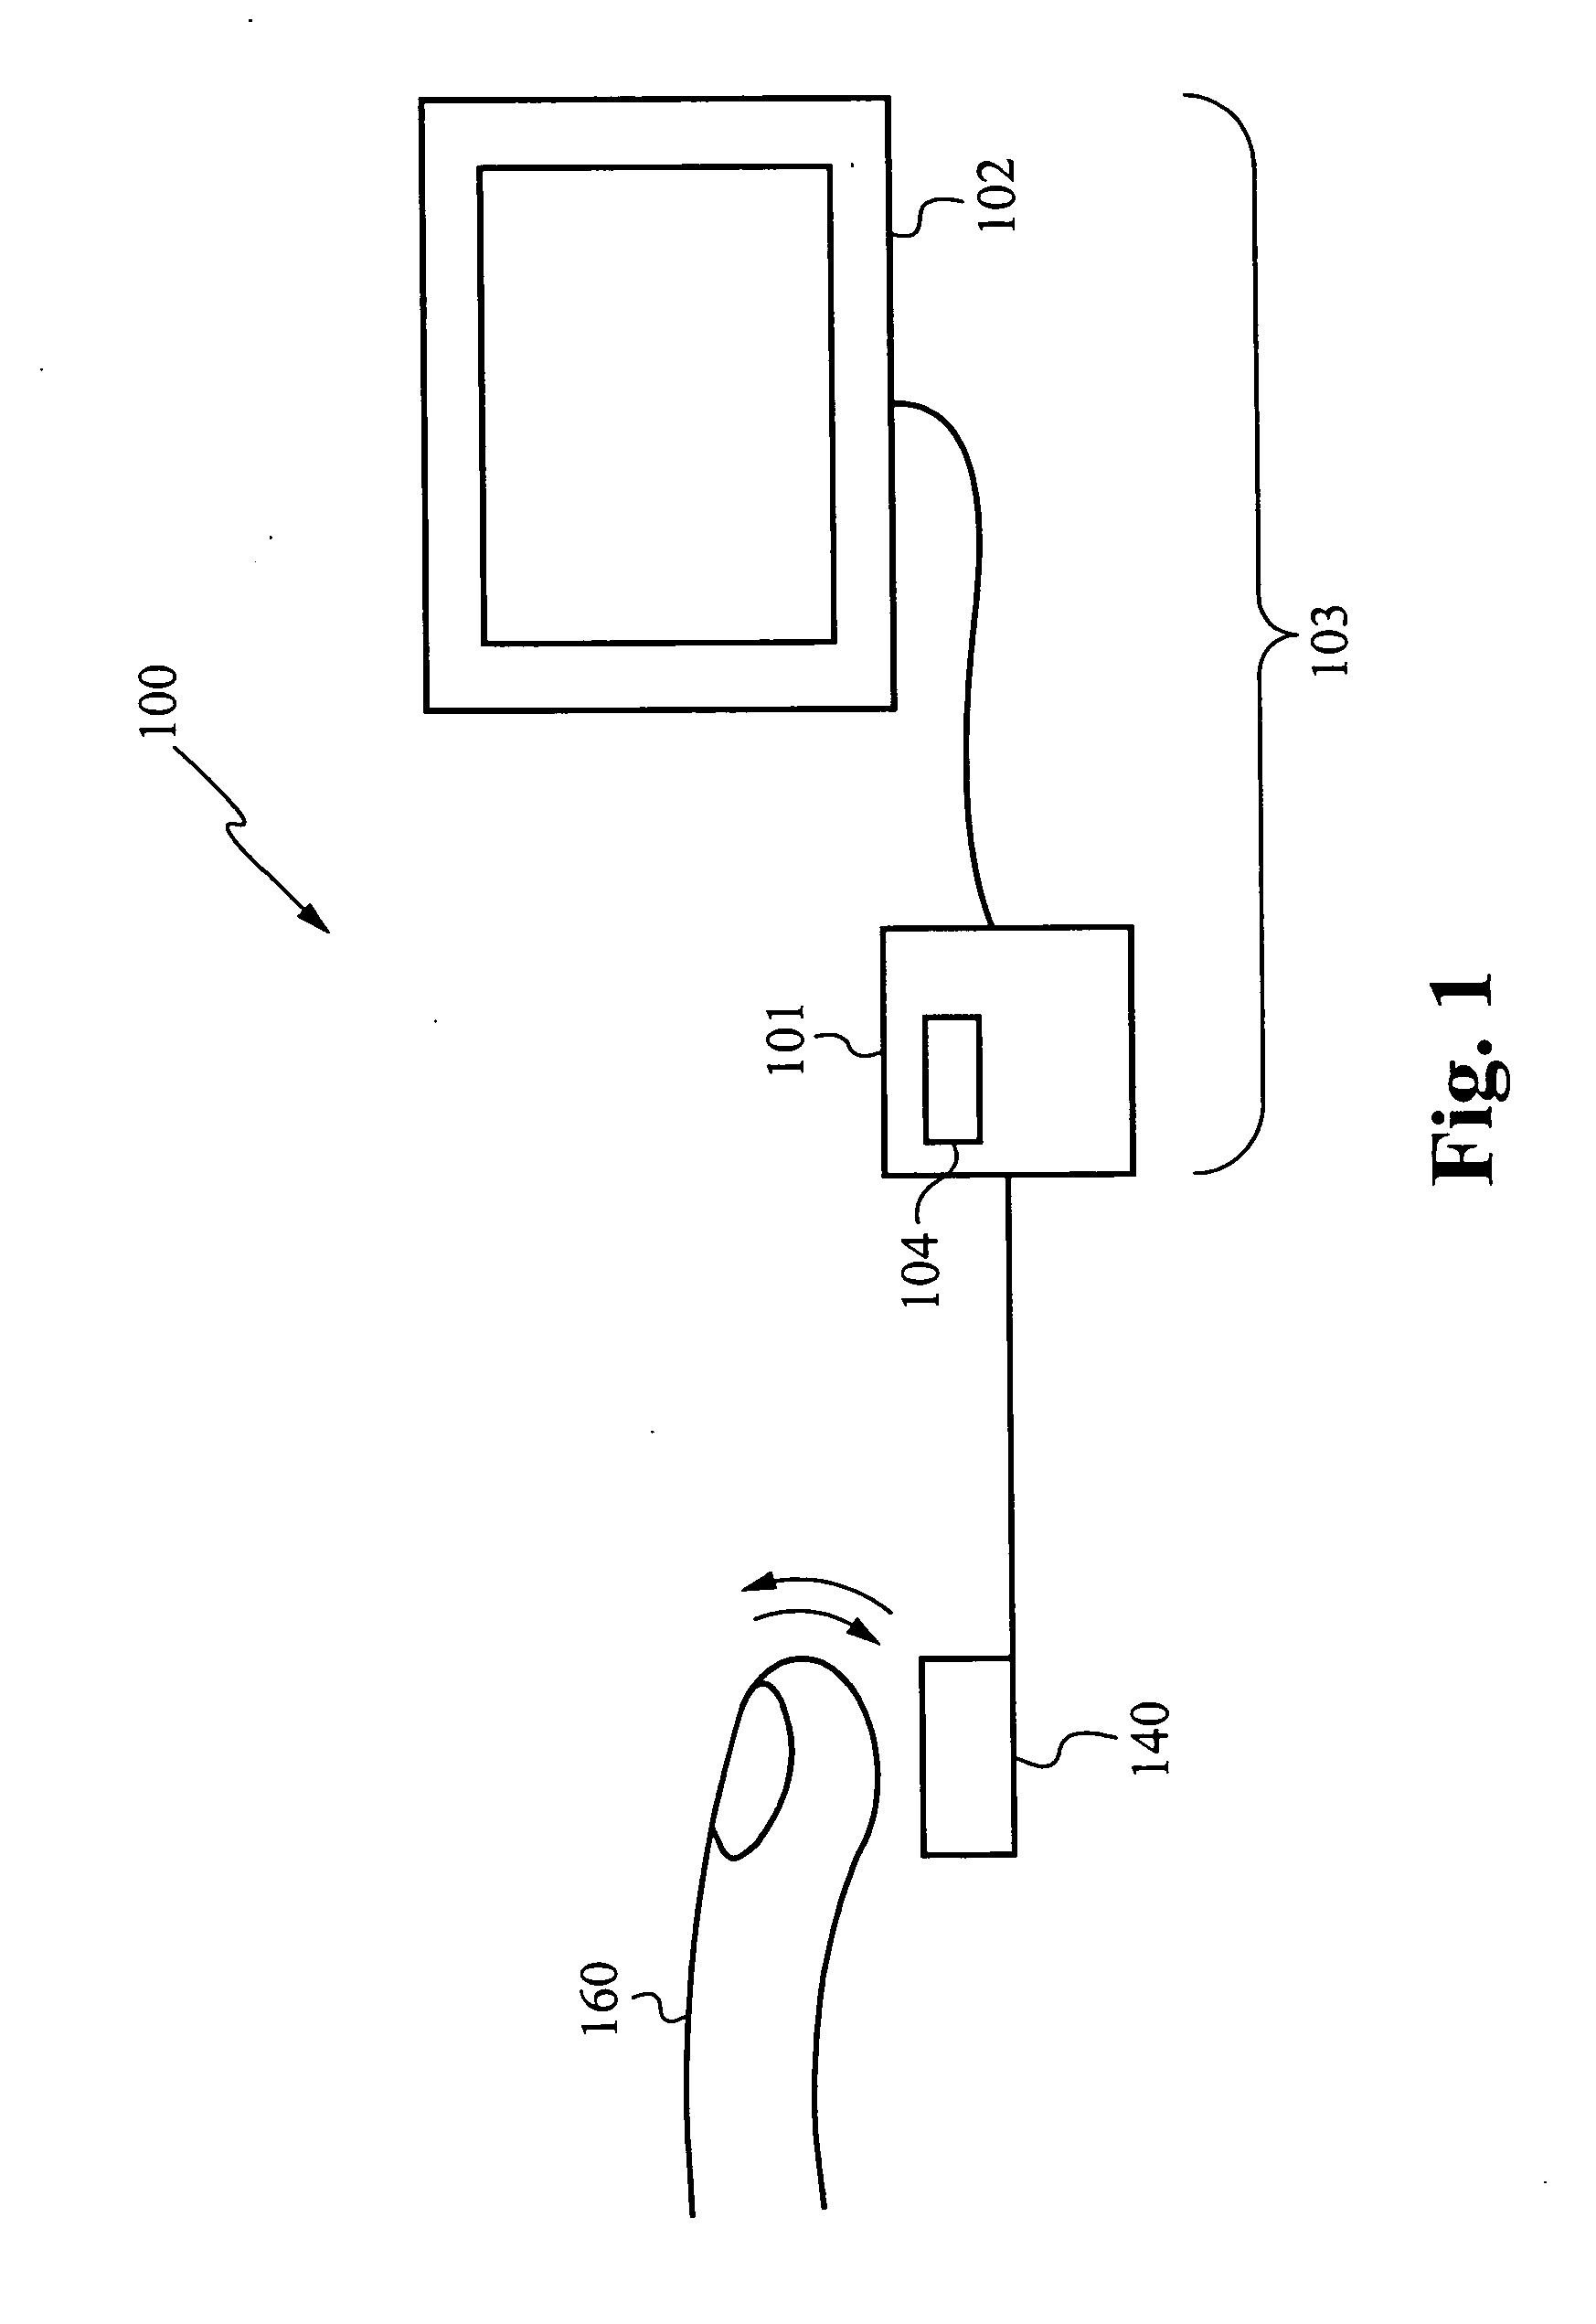 System for and method of emulating electronic input devices